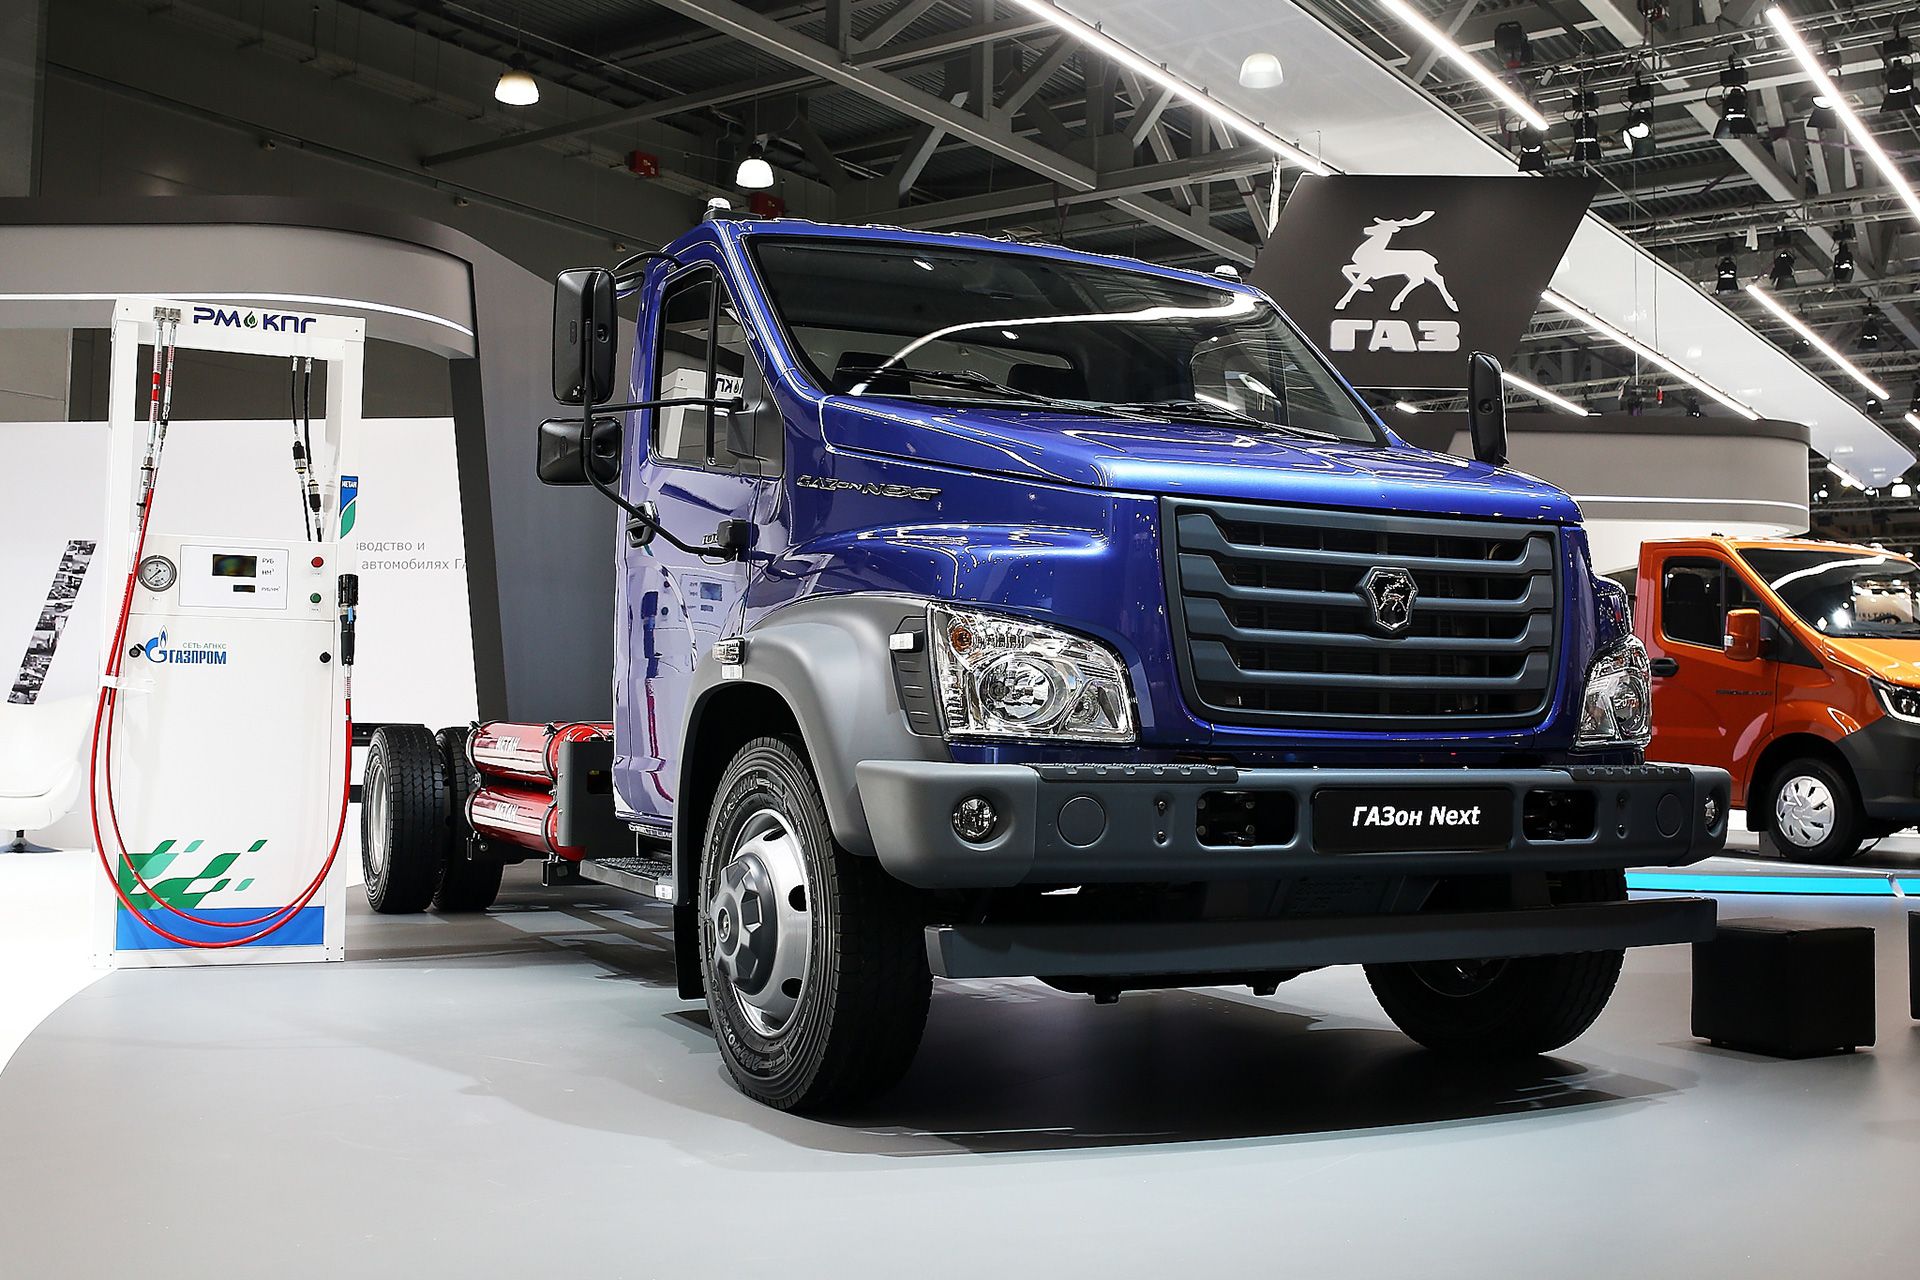 Next newest 8. Газон Некст CNG. Газон Некст 2021. Новый газон Некст. ГАЗ 2020 газон Некст.